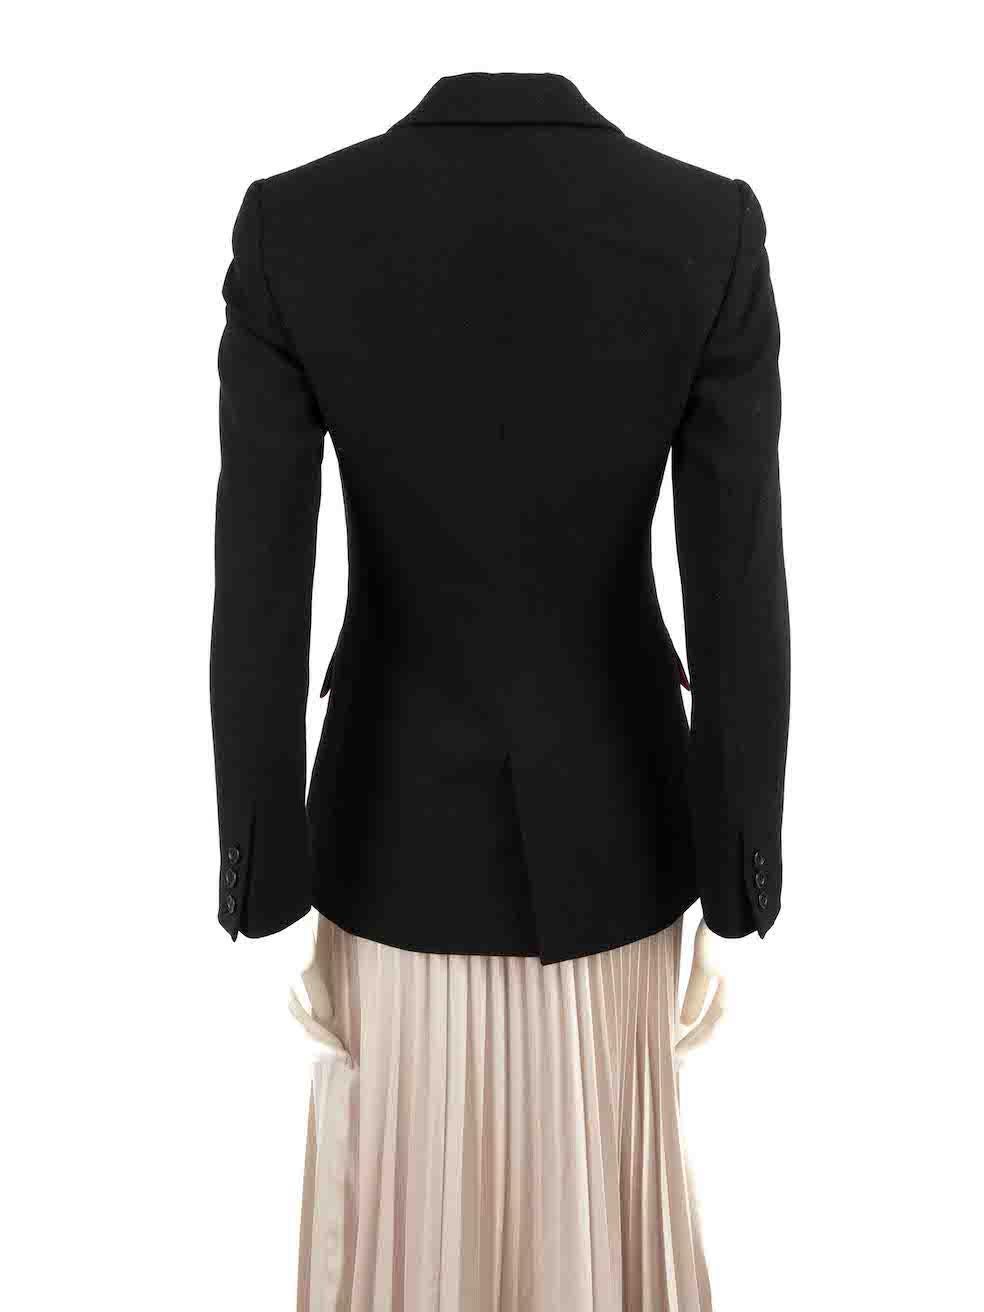 Dolce & Gabbana D&G Black Wool Button Up Blazer Size XS In Good Condition For Sale In London, GB